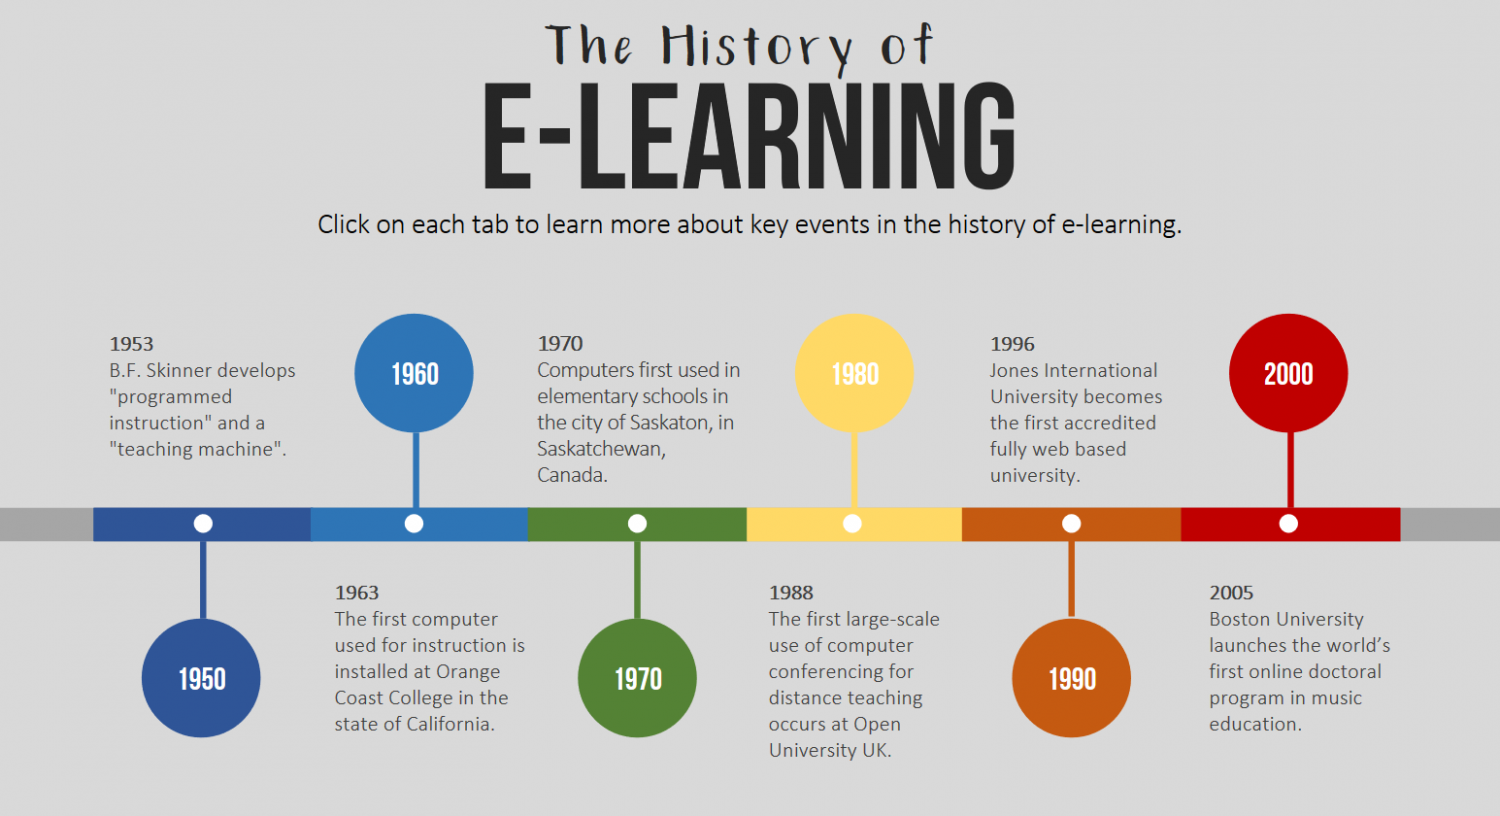 How was e-Learning born and how did it develop?